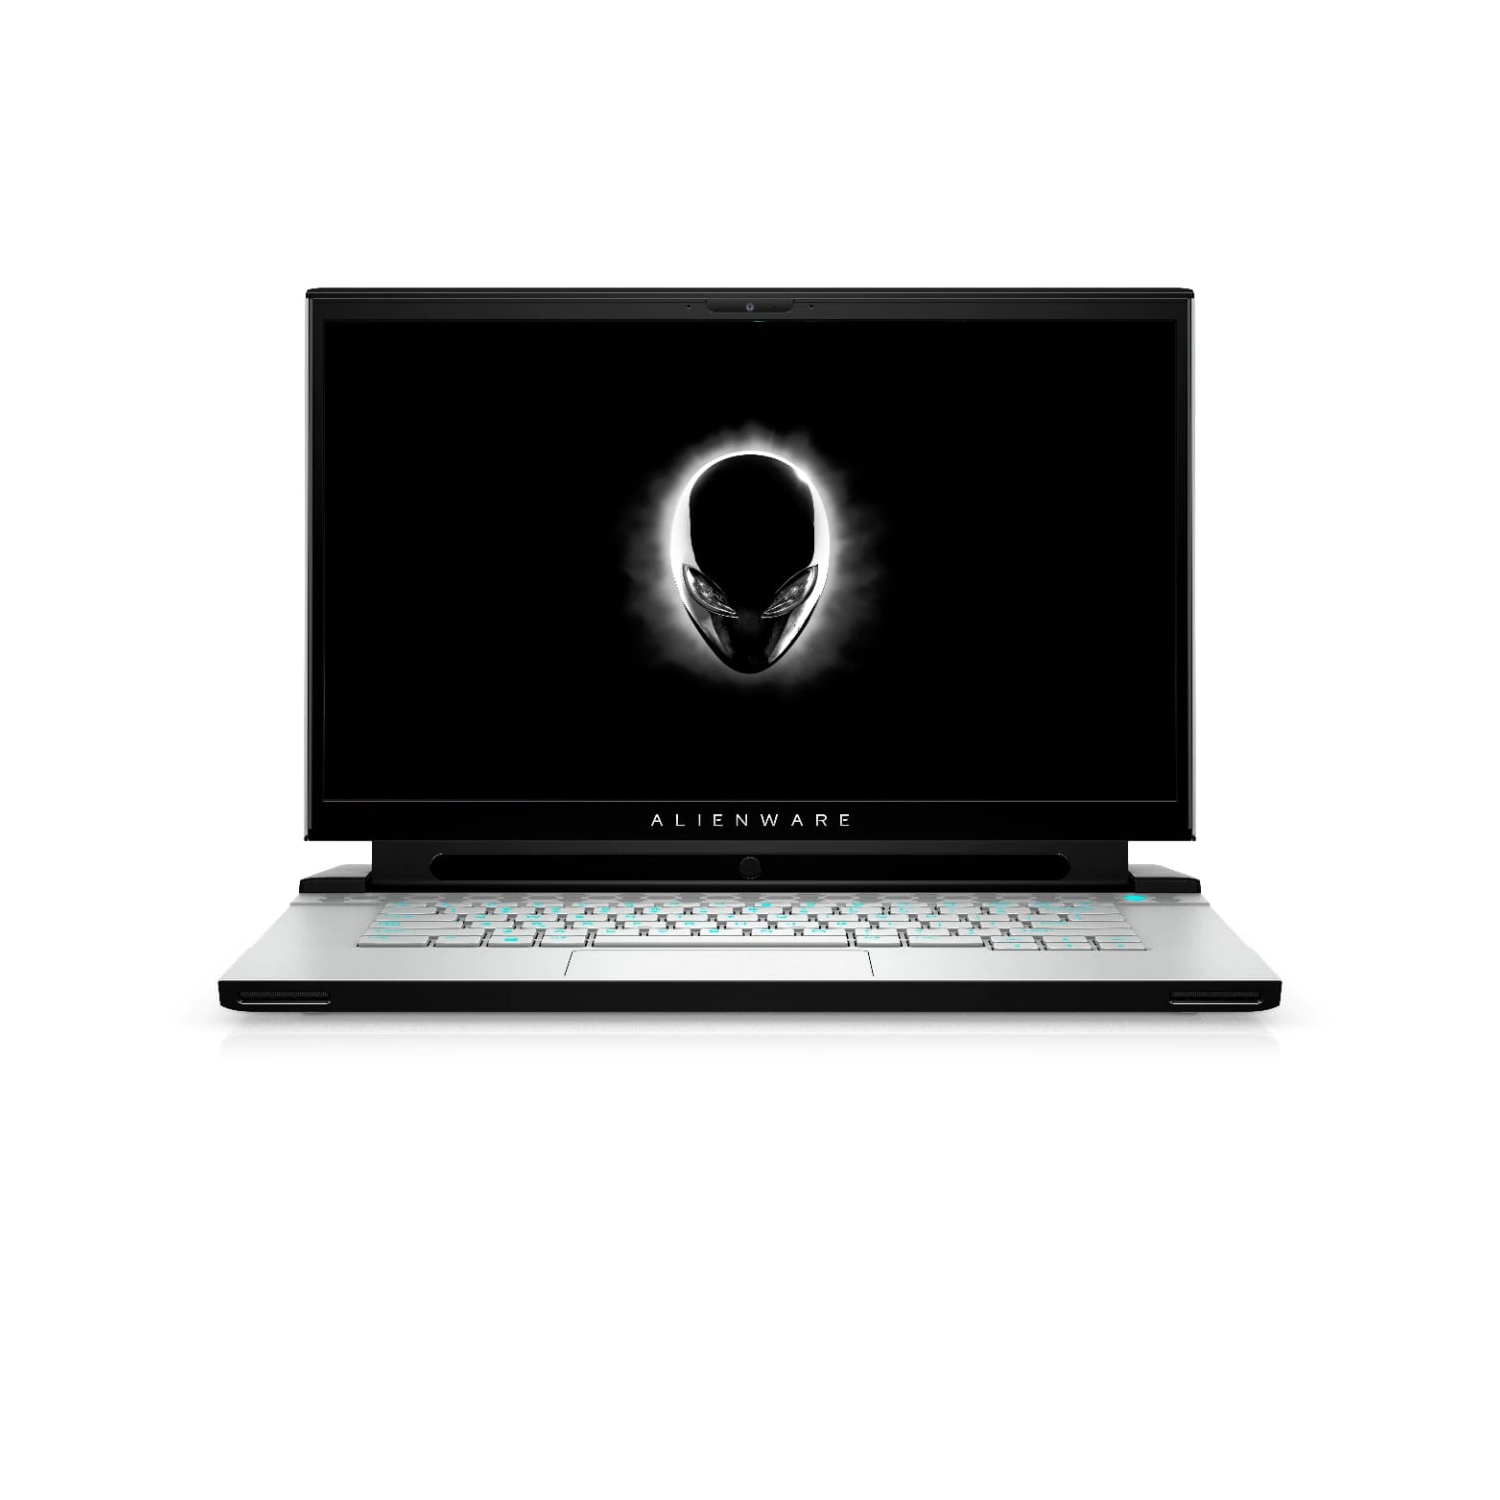 Refurbished (Excellent) - Dell Alienware m15 R3 Gaming Laptop (2020), 15.6" FHD, Core i7, 1TB SSD, 32GB RAM, 2080 SUPER, 6 Cores @ 5 GHz, 10th Gen CPU Certified